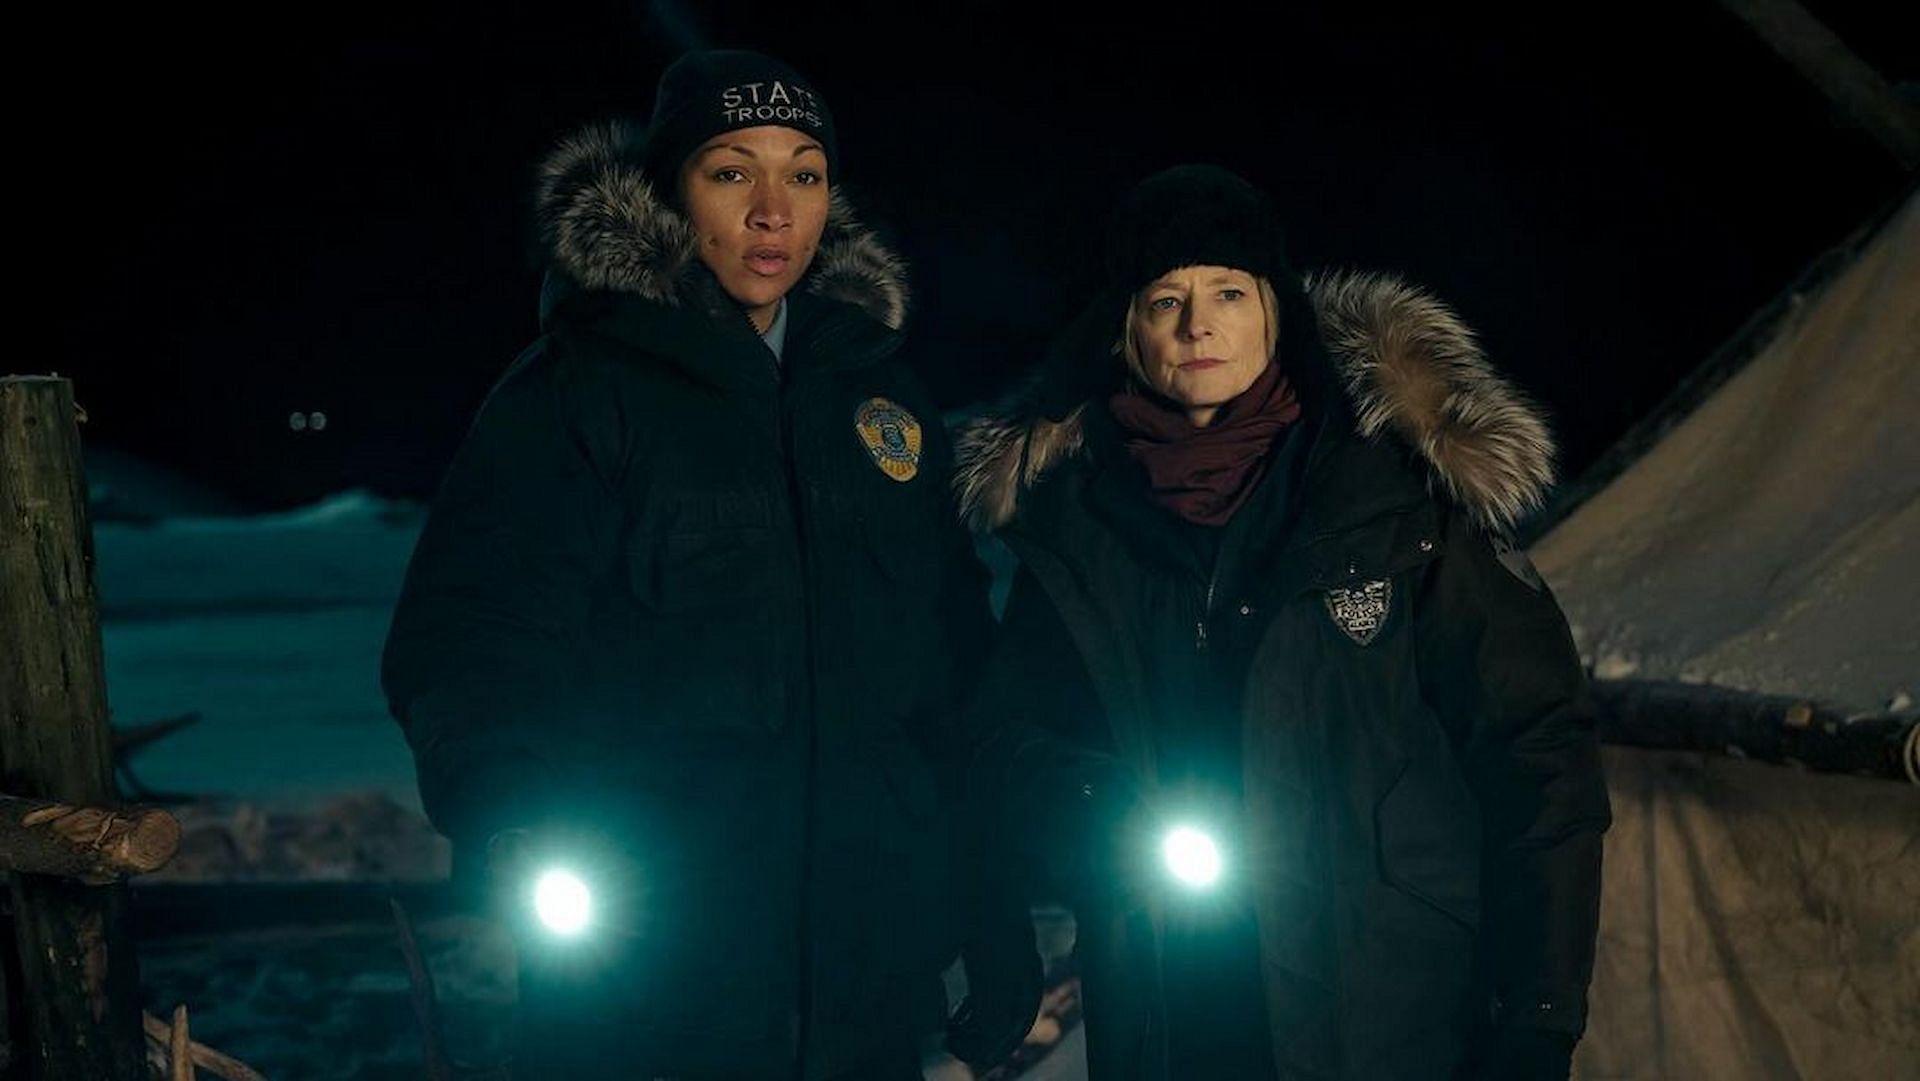 The new season of True Detective stars Jodie Foster and Kali Reis in the lead (Image via Instagram/True Detective)